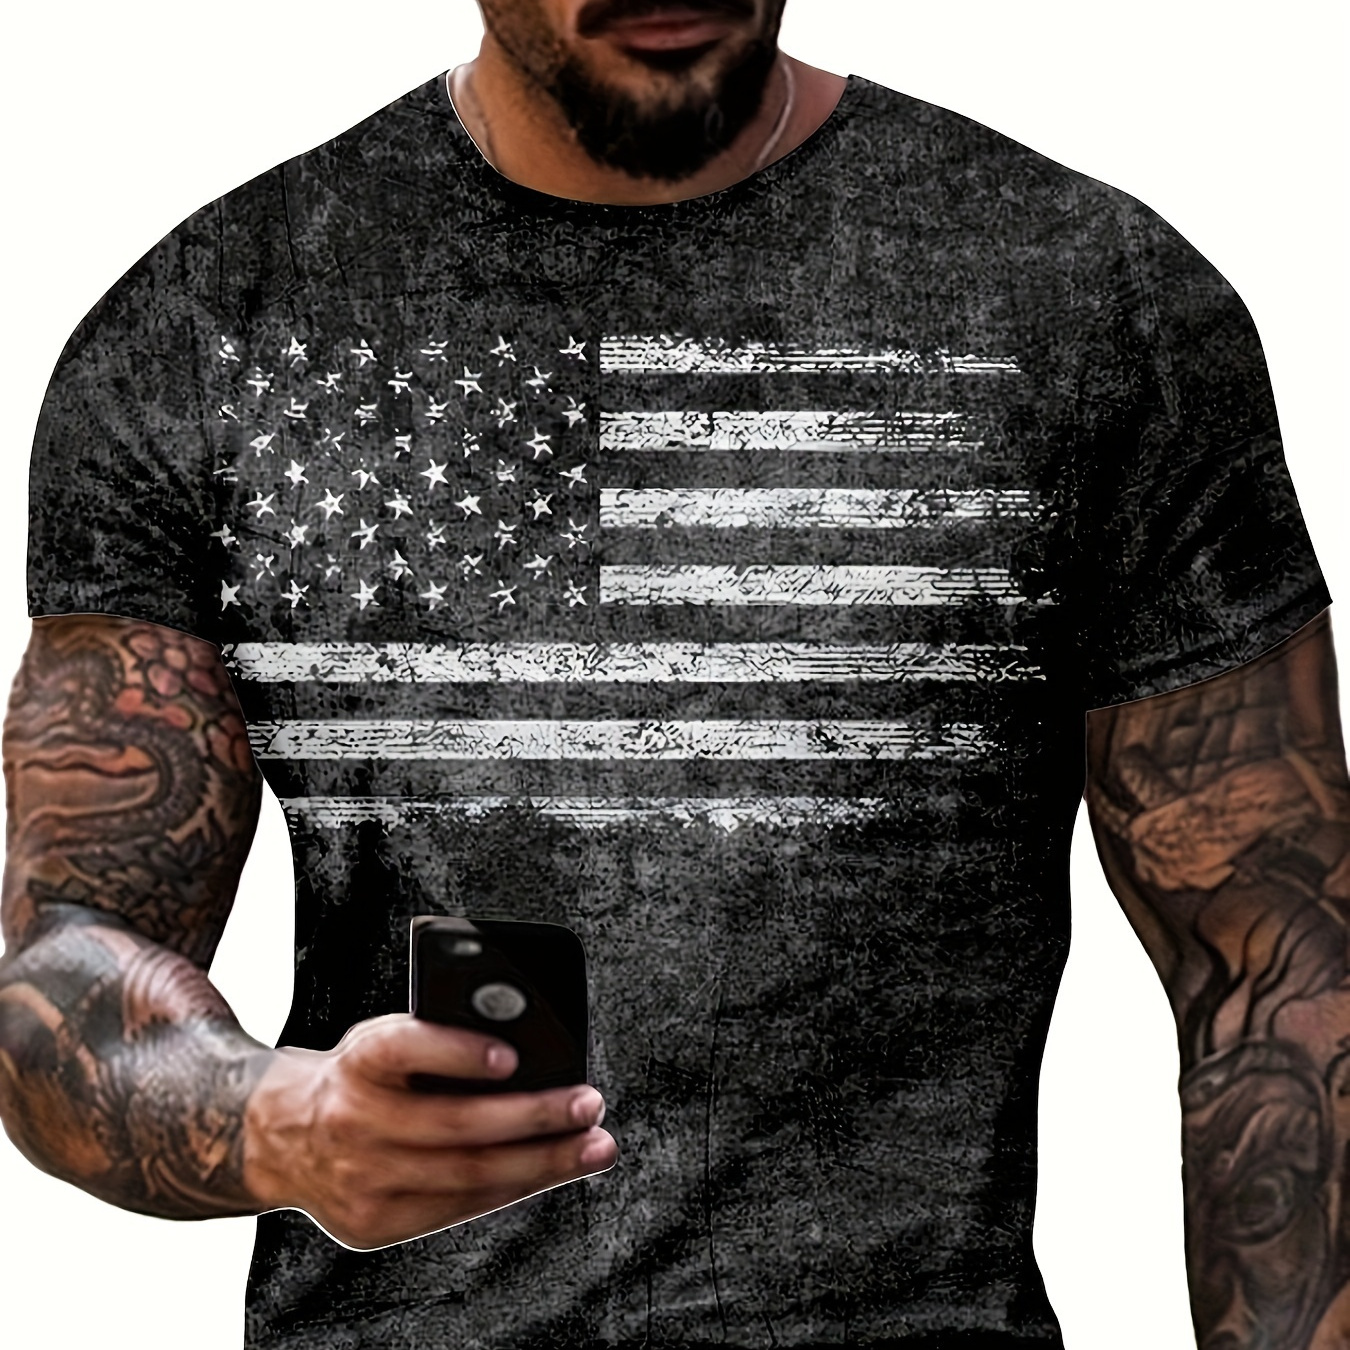 

Men's Flag Graphic Print T-shirt, Casual Short Sleeve Crew Neck Tee, Men's Clothing For Summer Outdoor Streetwear